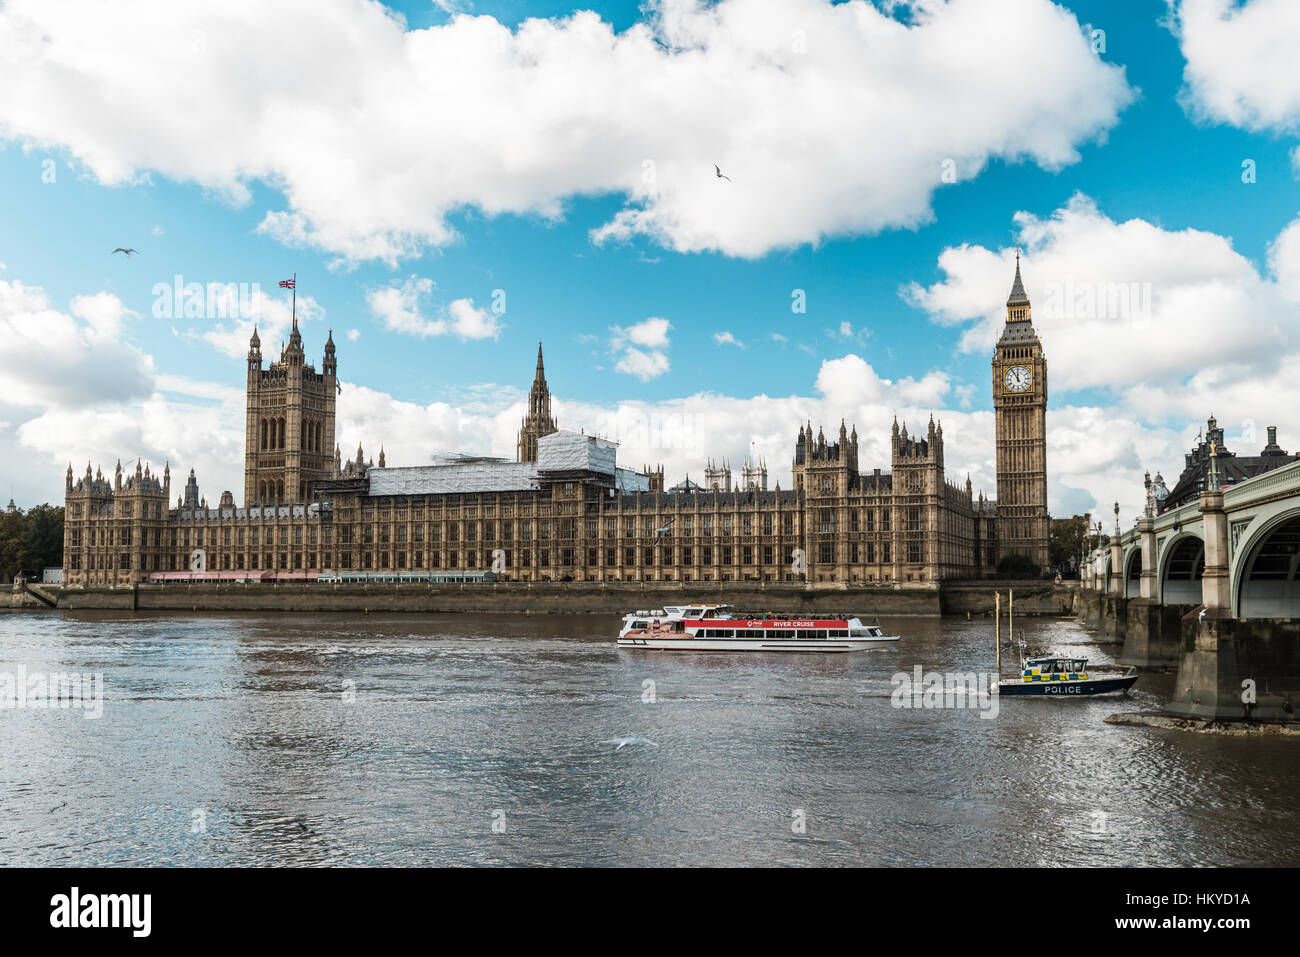 London, United Kingdom - October 18, 2016: The Palace of Westminster or House of Commons and the House of Lords. Parliament in London, UK Stock Photo